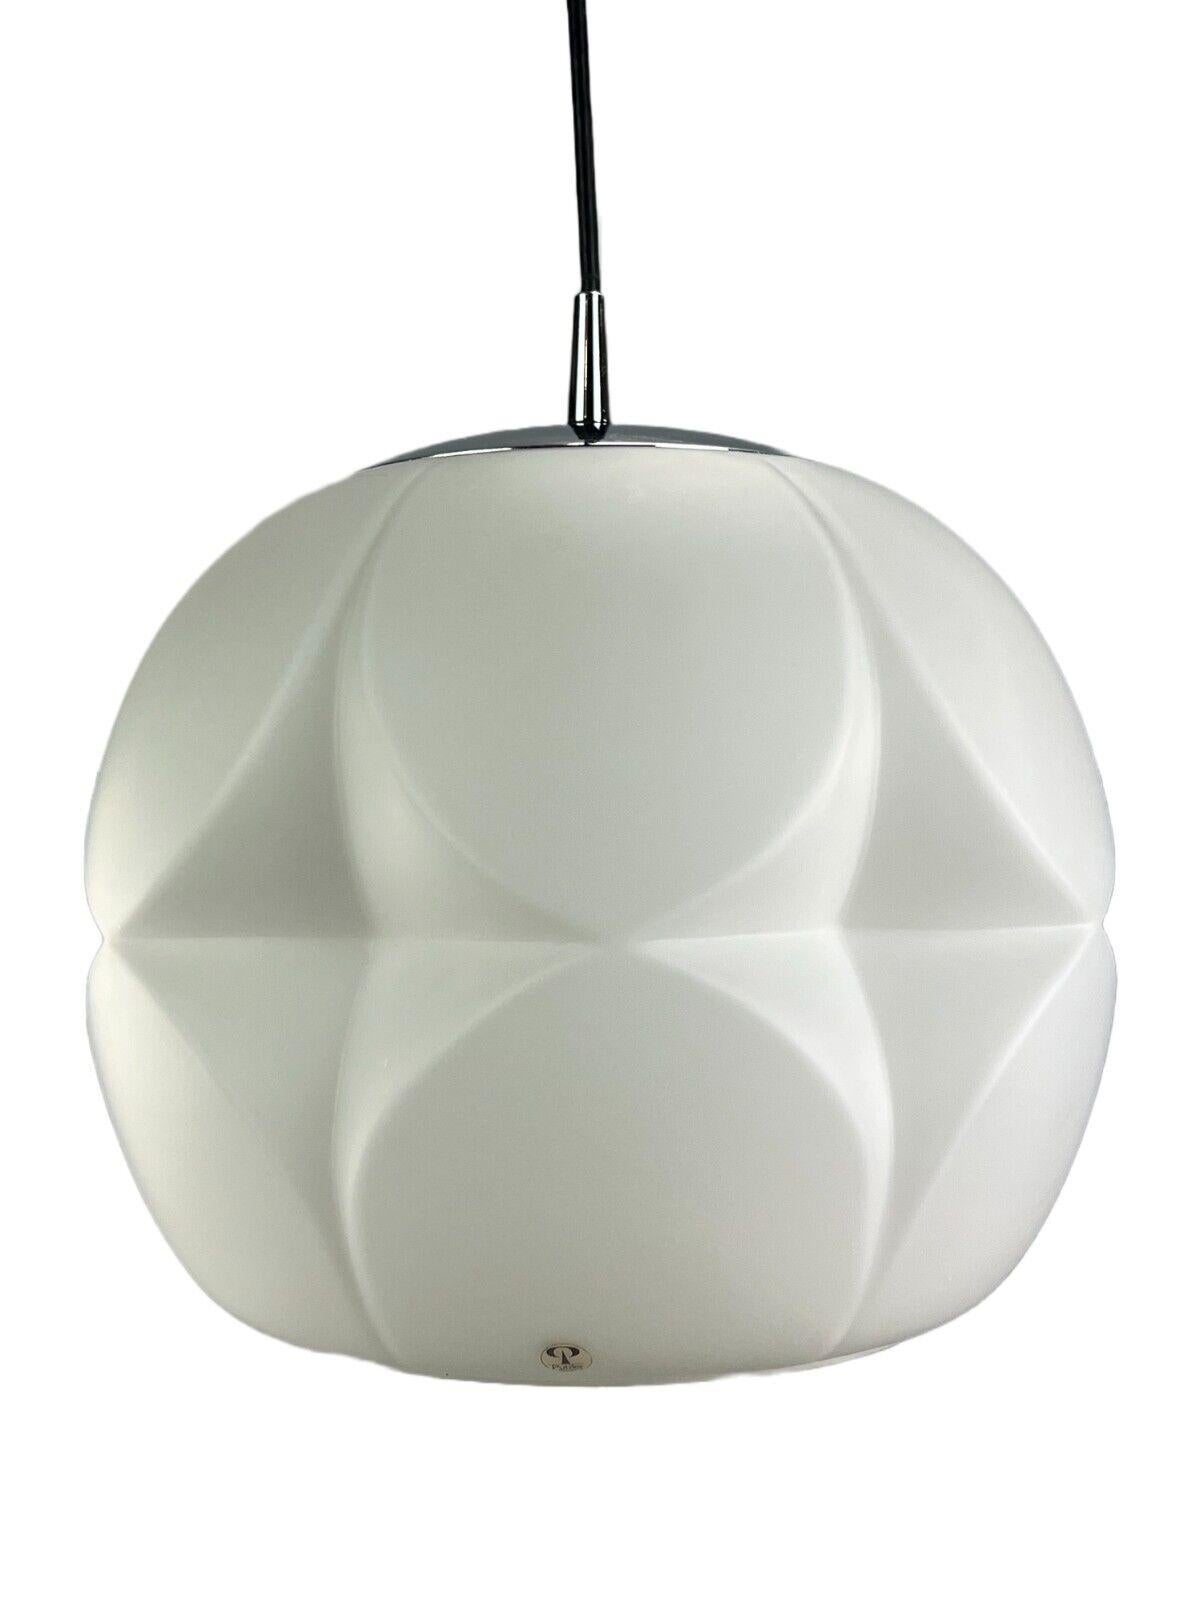 60s 70s Lamp Peill & Putzler hanging lamp ceiling lamp design space age

Object: ceiling lamp

Manufacturer: Peill & Putzler

Condition: good

Age: around 1960-1970

Dimensions:

Diameter = 33cm
Height = 34cm

Other notes:

E27